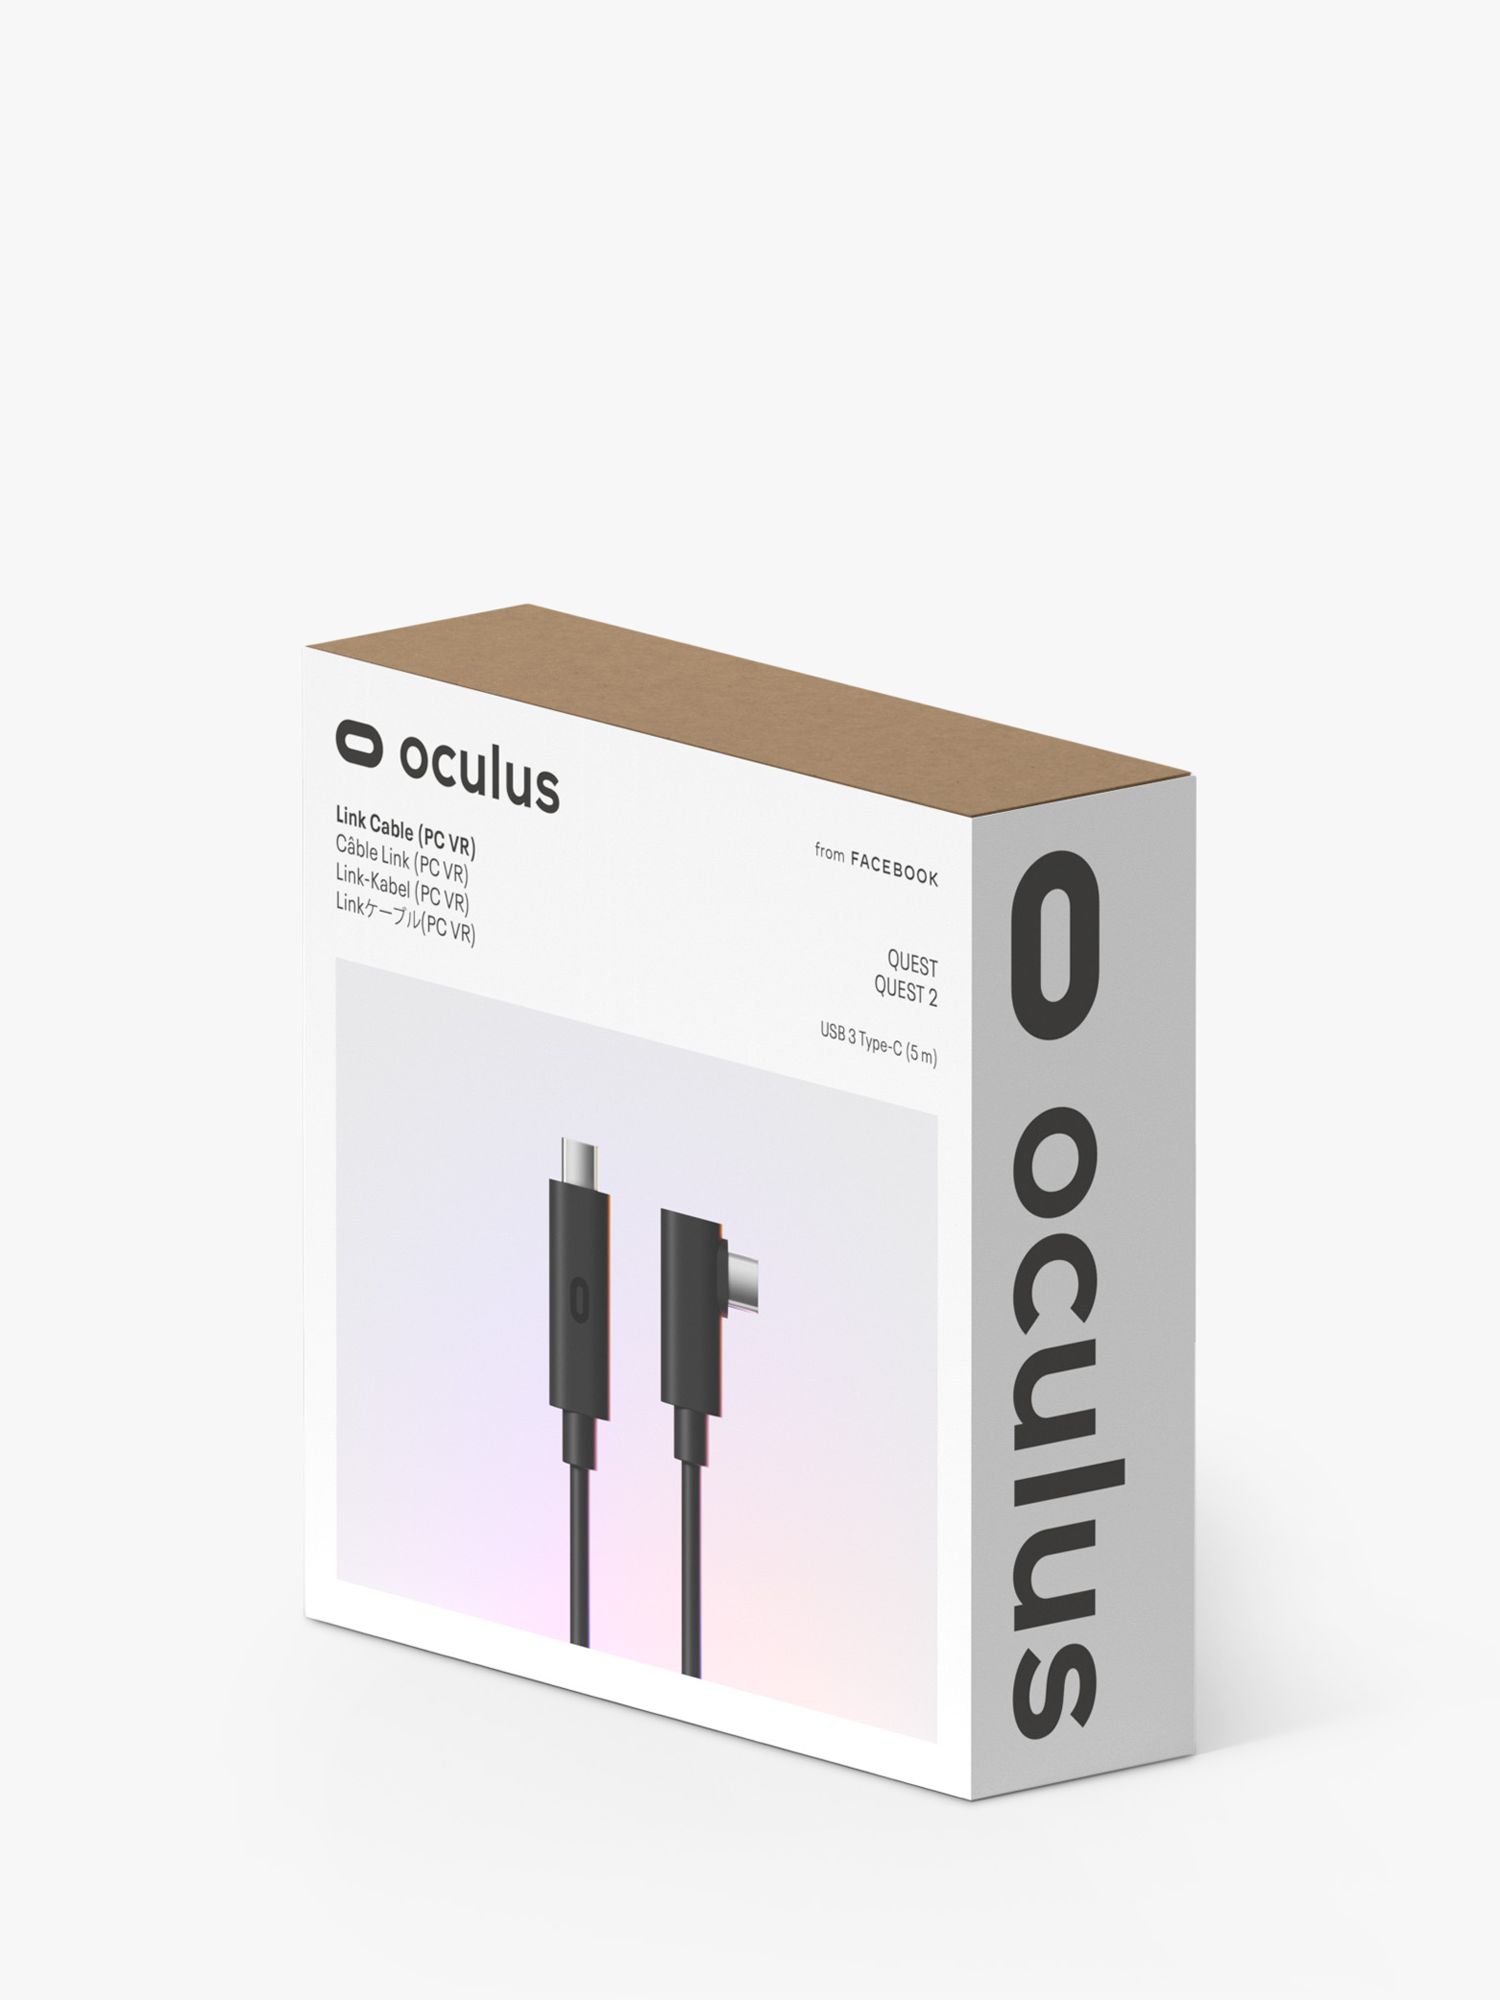 link cable oculus